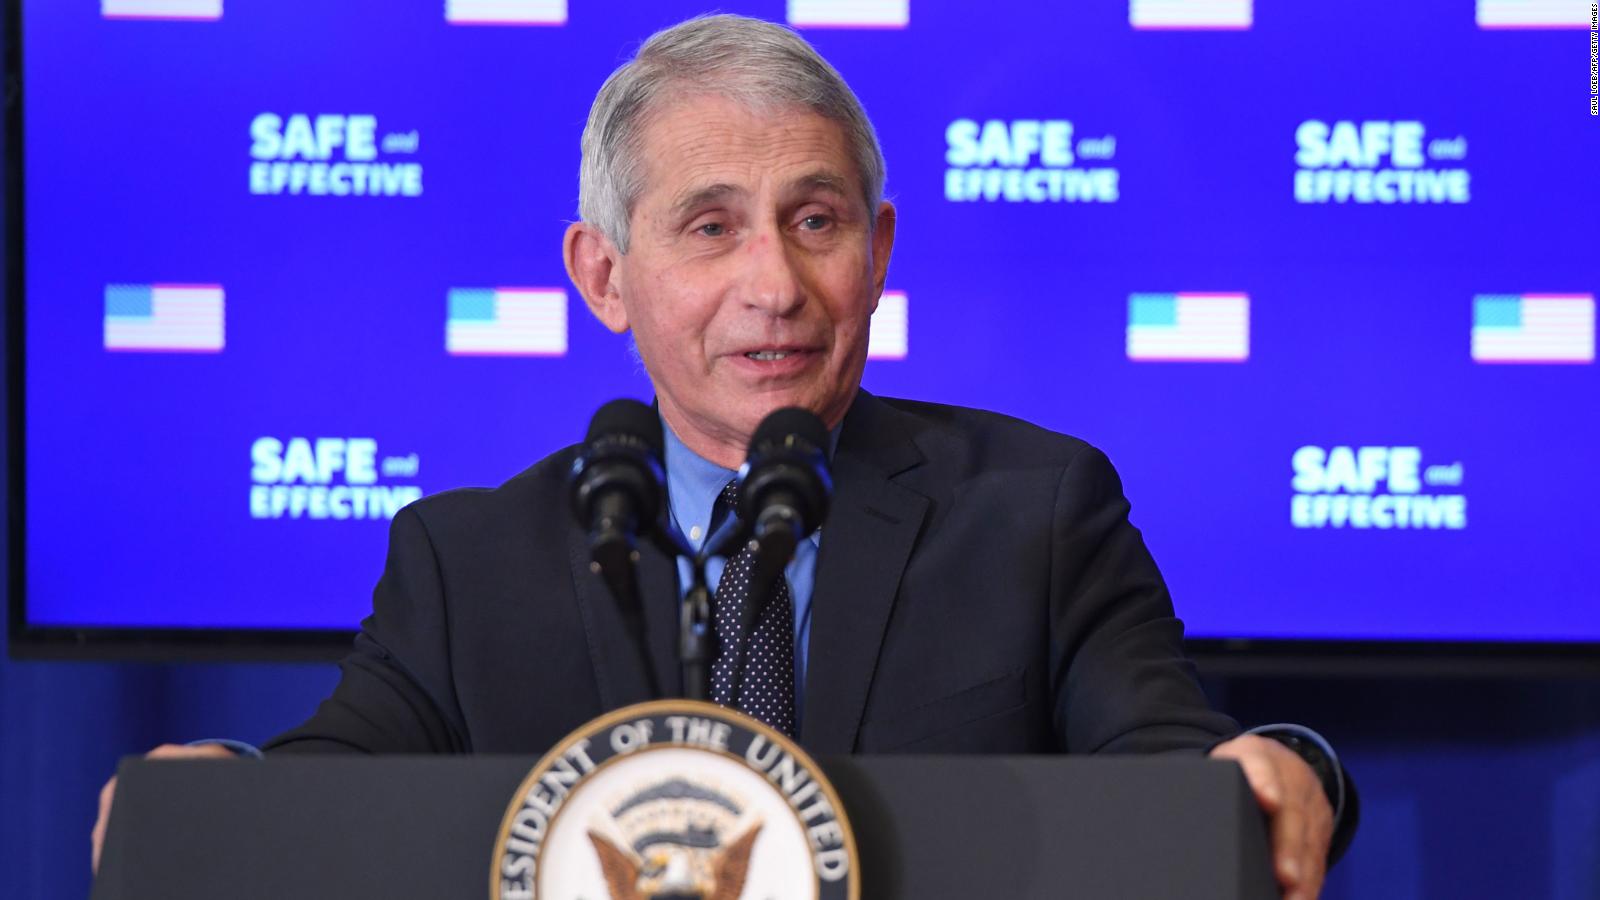 Fauci: We don't want the pandemic to be much worse